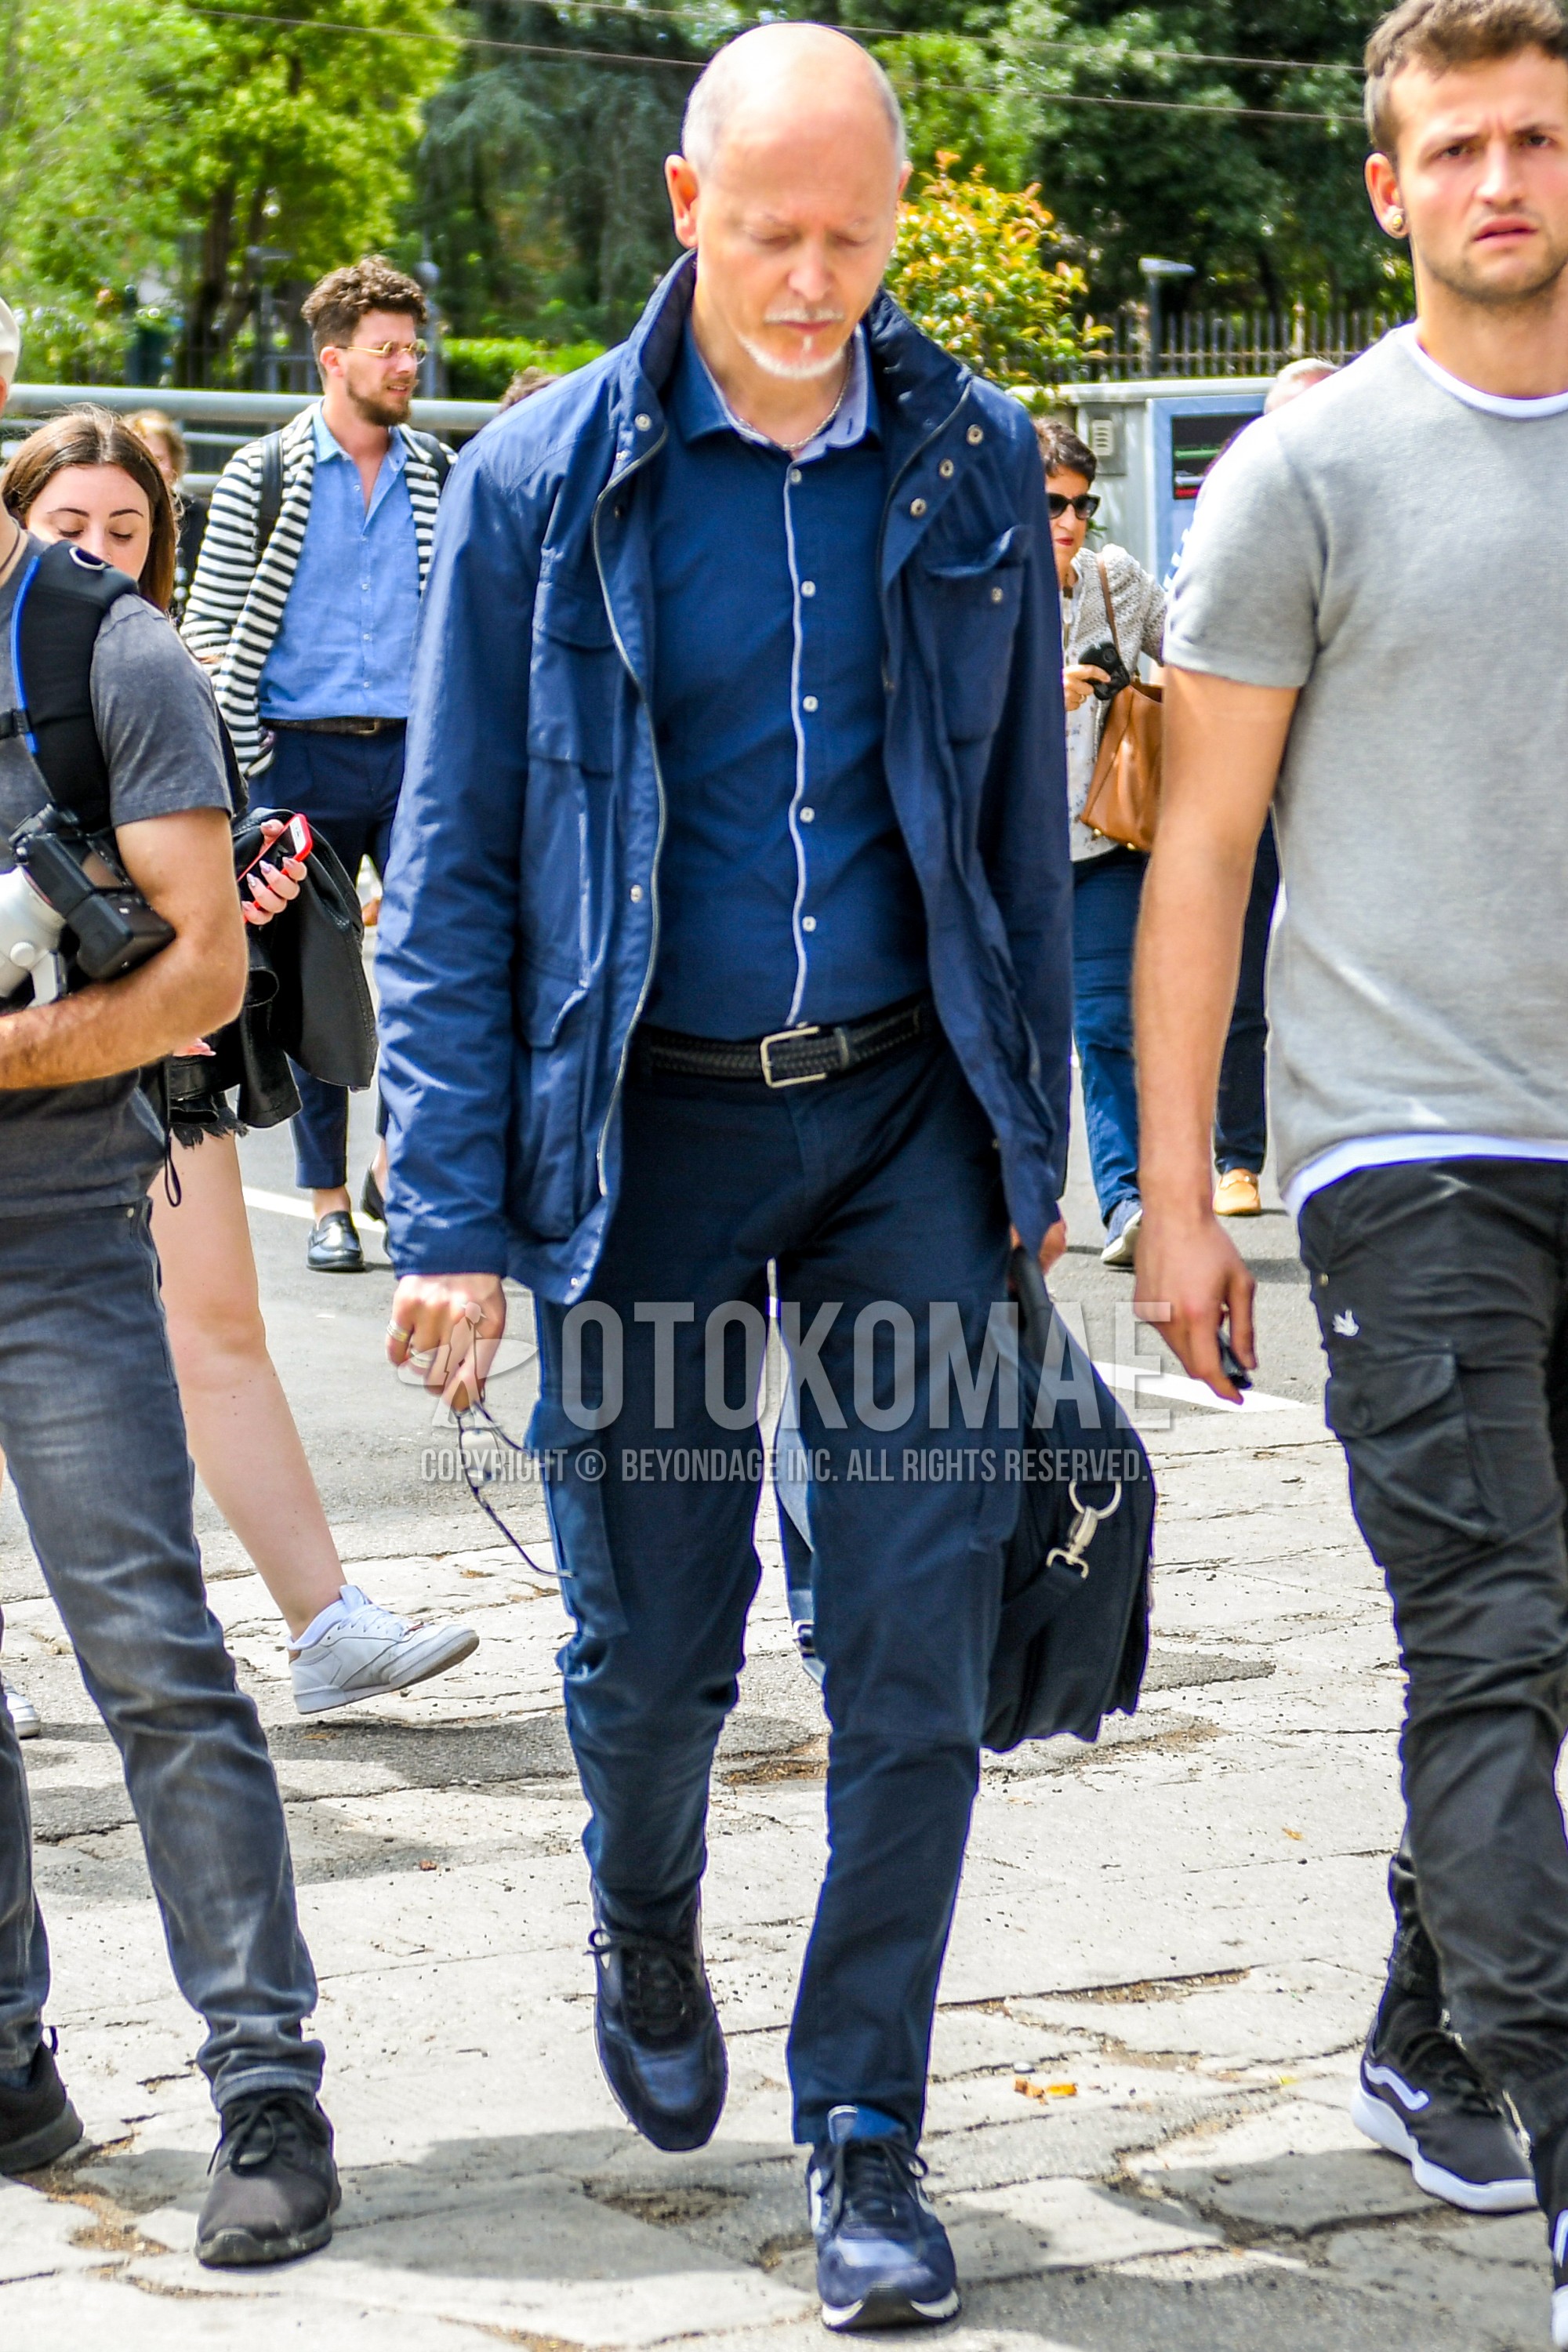 Men's spring autumn outfit with navy plain M-65, navy plain shirt, black plain leather belt, black plain braided belt, navy plain cargo pants, navy plain chinos, navy low-cut sneakers, navy plain briefcase/handbag.